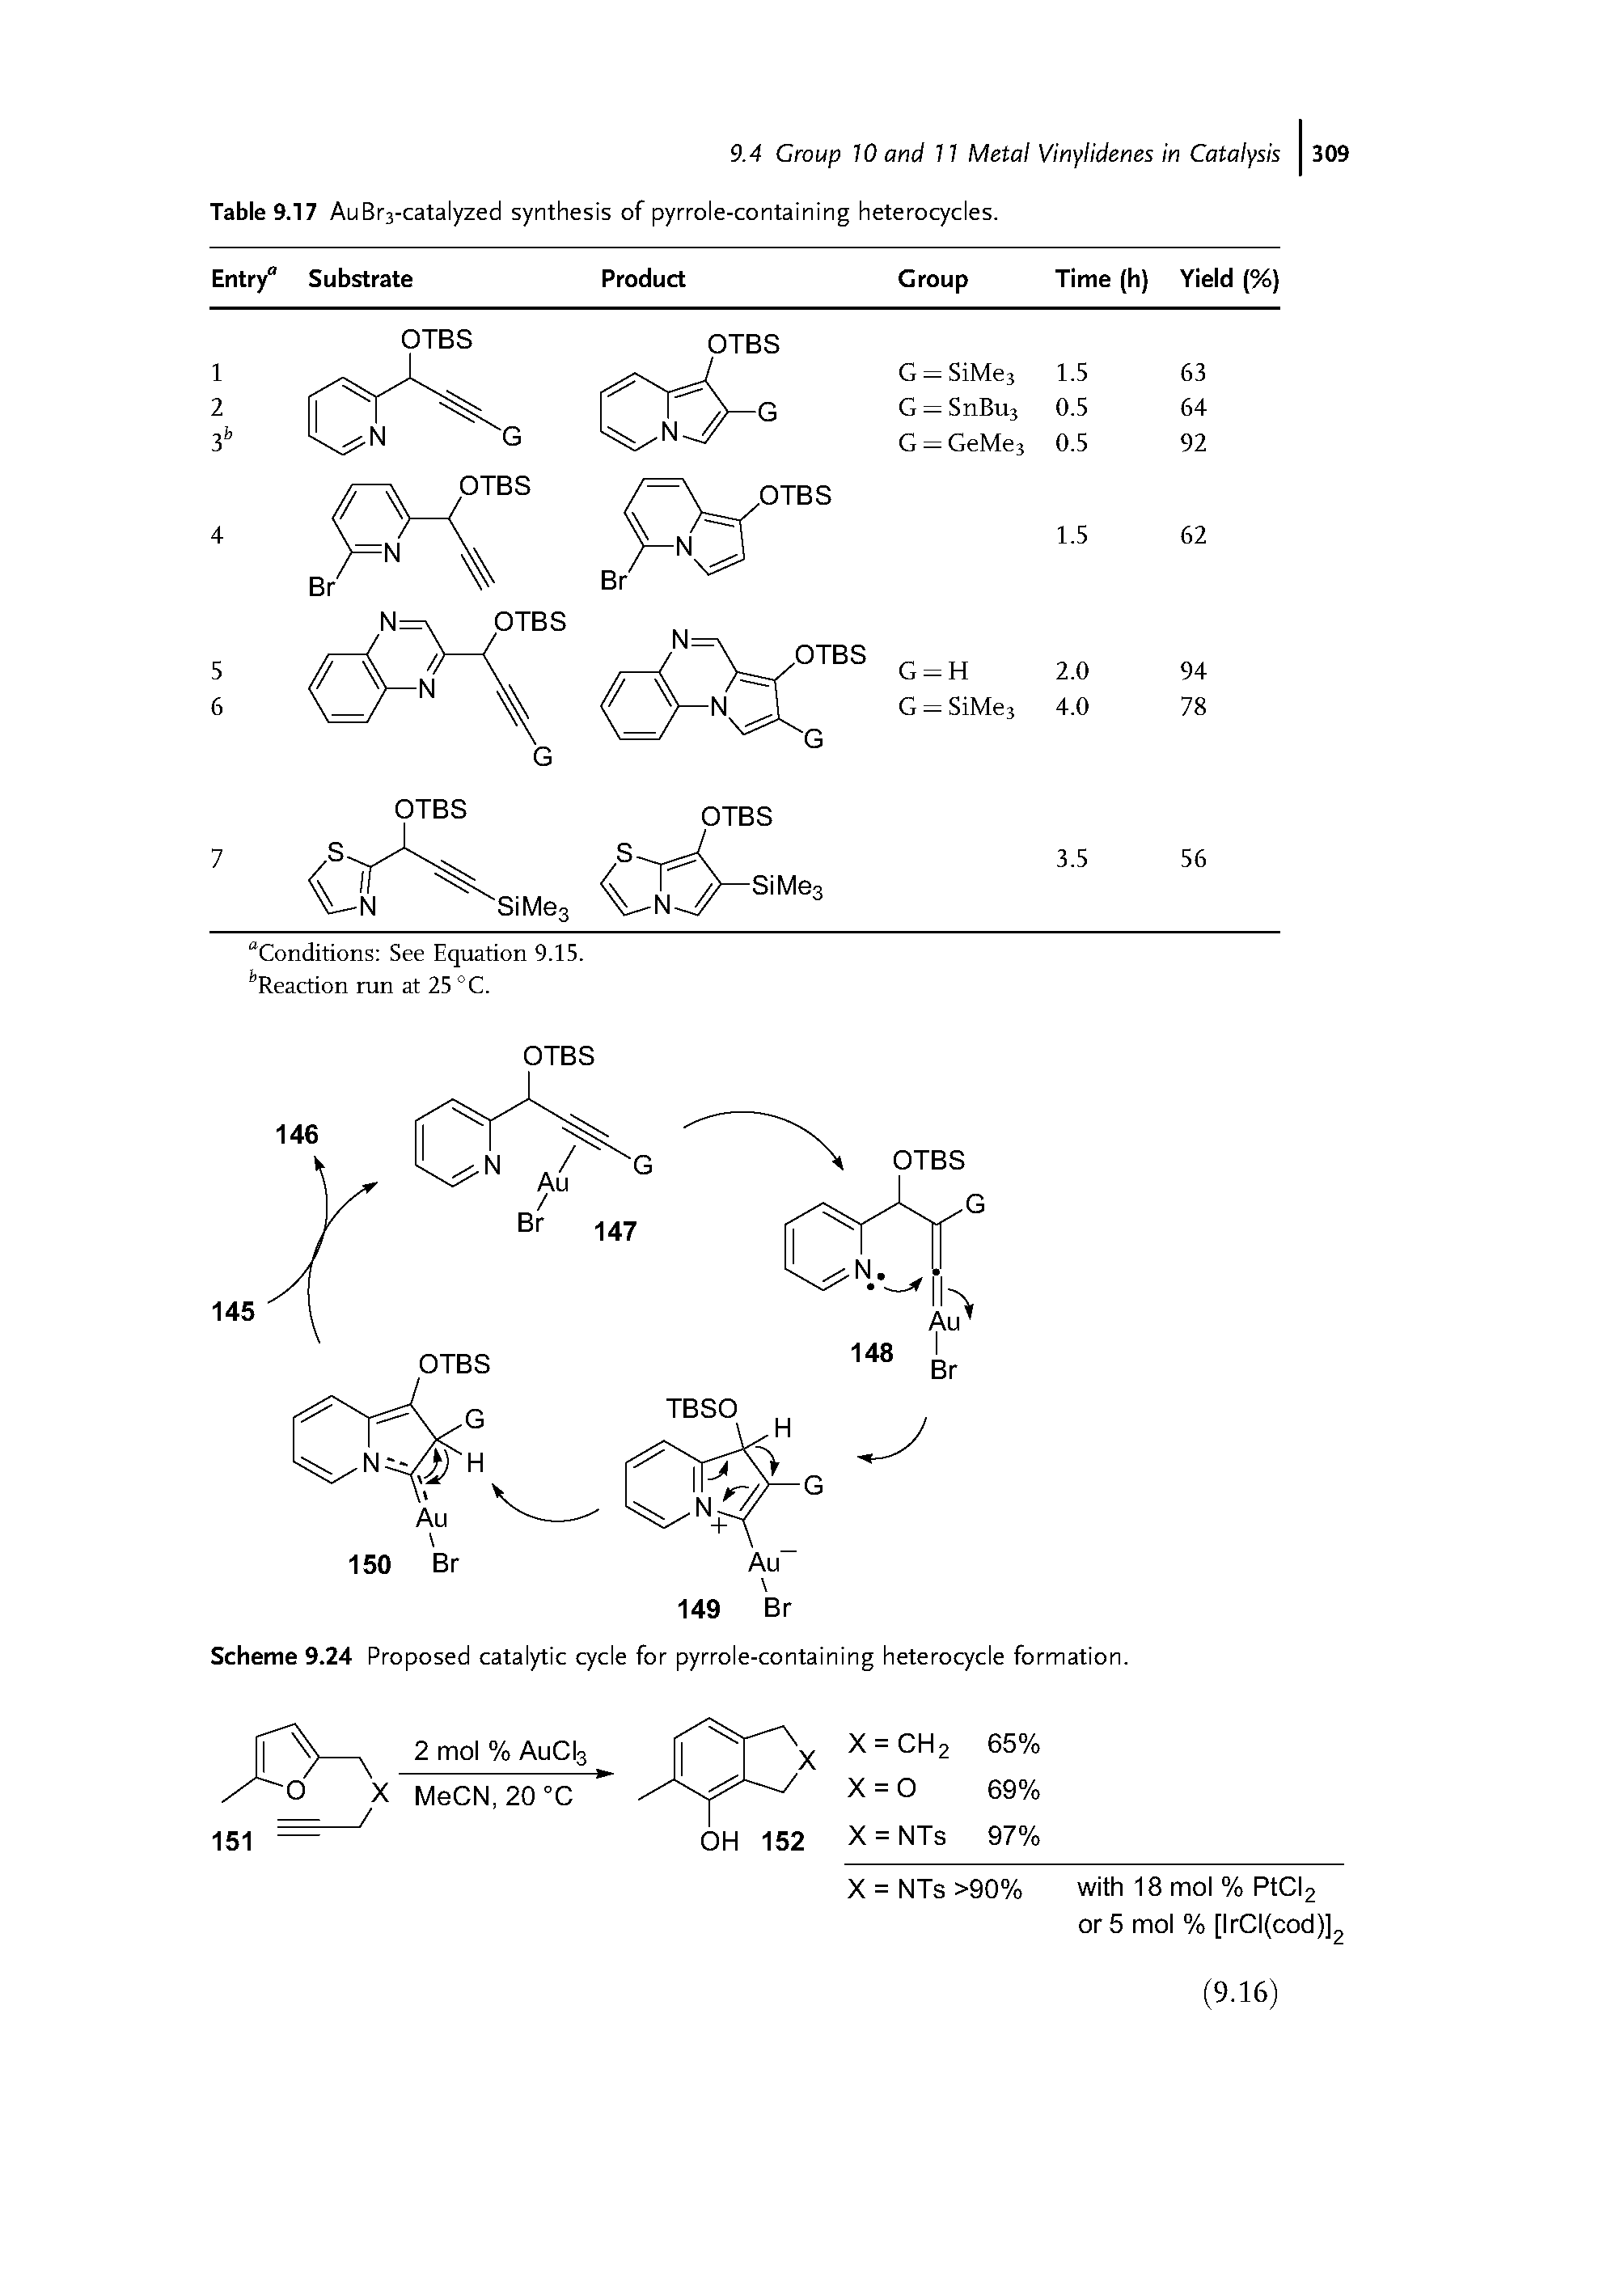 Scheme 9.24 Proposed catalytic cycle for pyrrole-containing heterocycle formation.